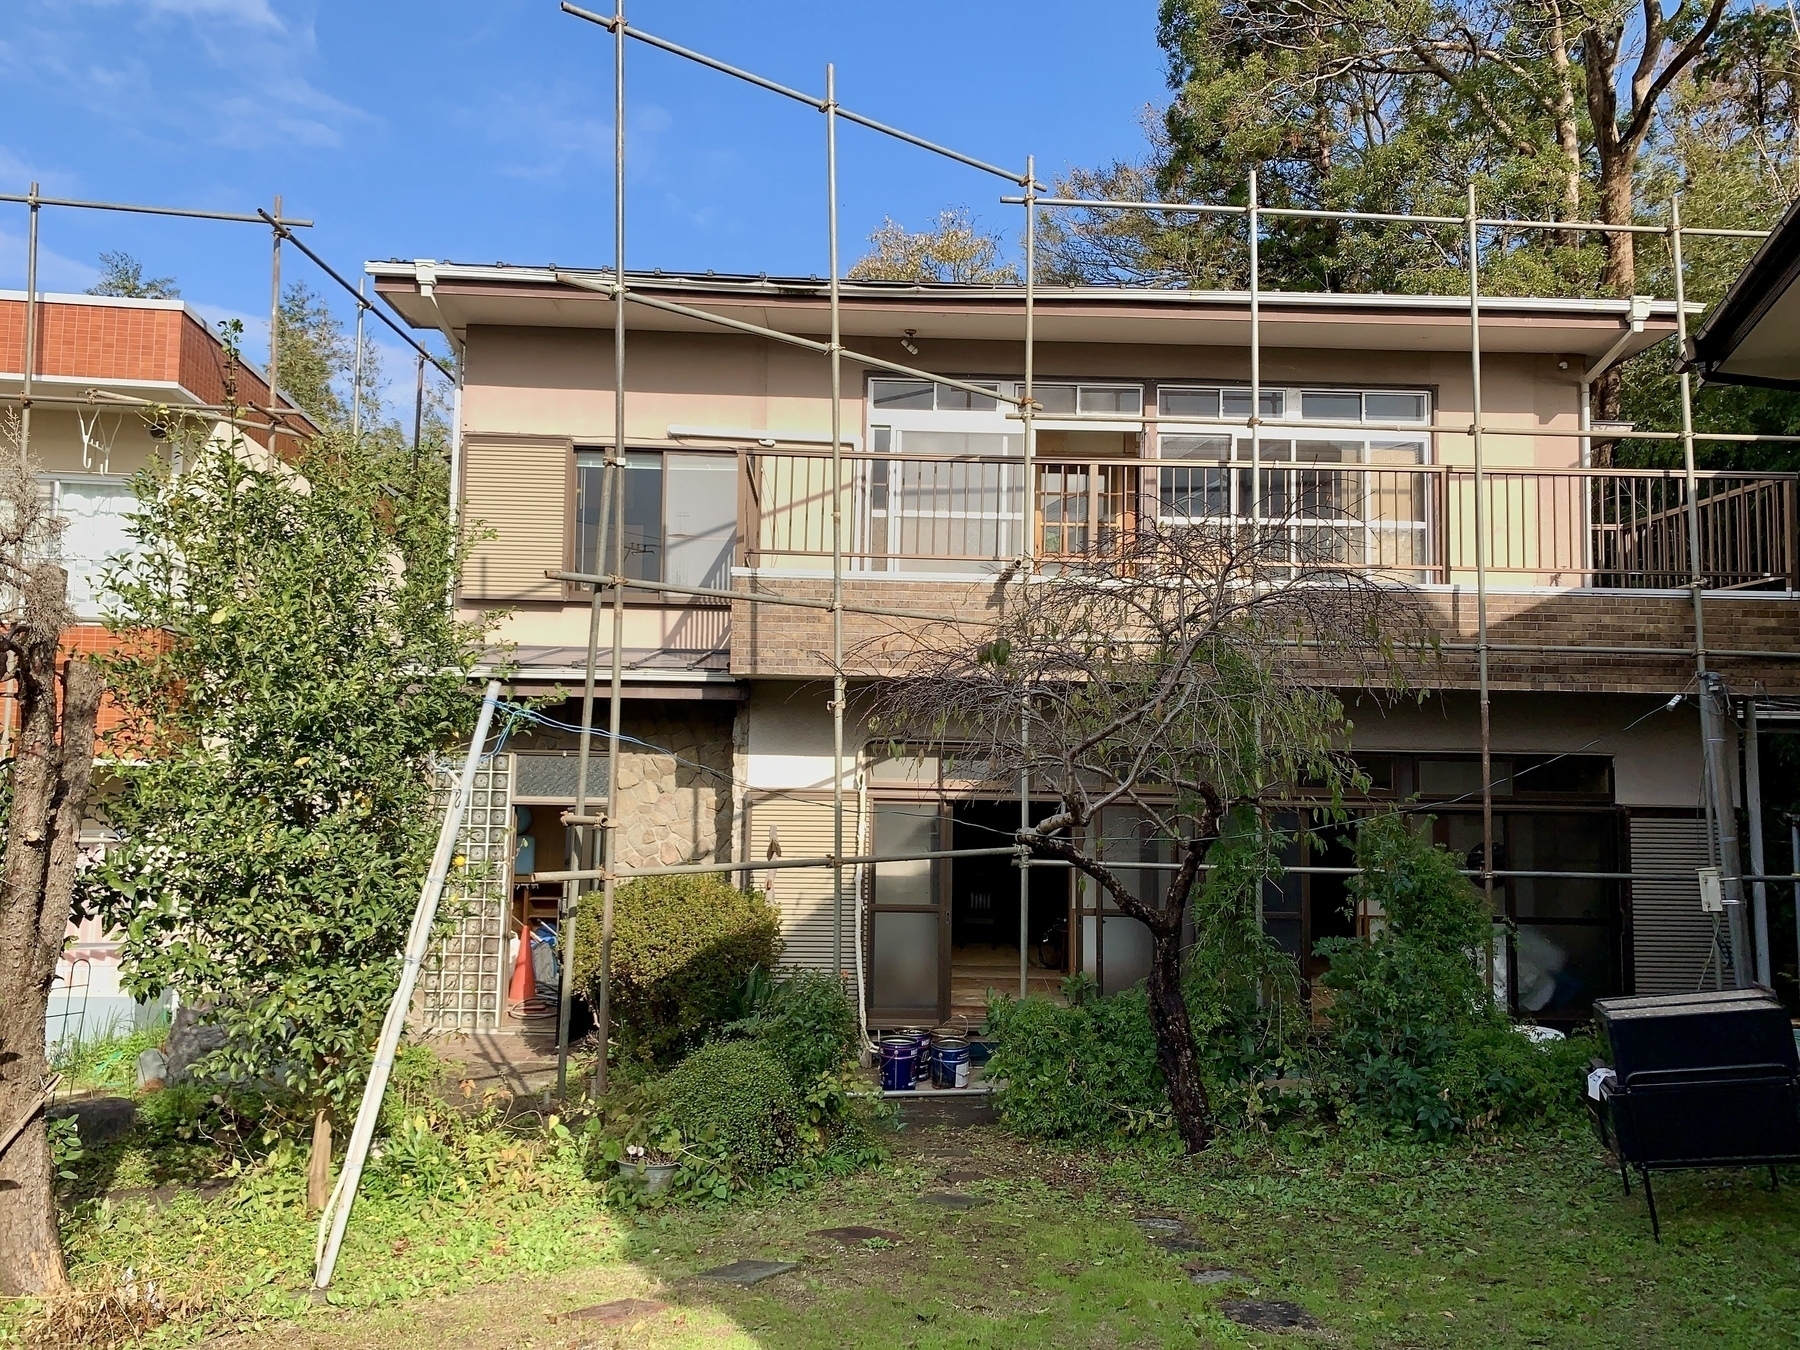 An old tan and brown Japanese style house with scaffolding around prior to it being torn down. Yard is kind of overgrown. There’s a makeshift utility pole with an electric wire strung from it. 